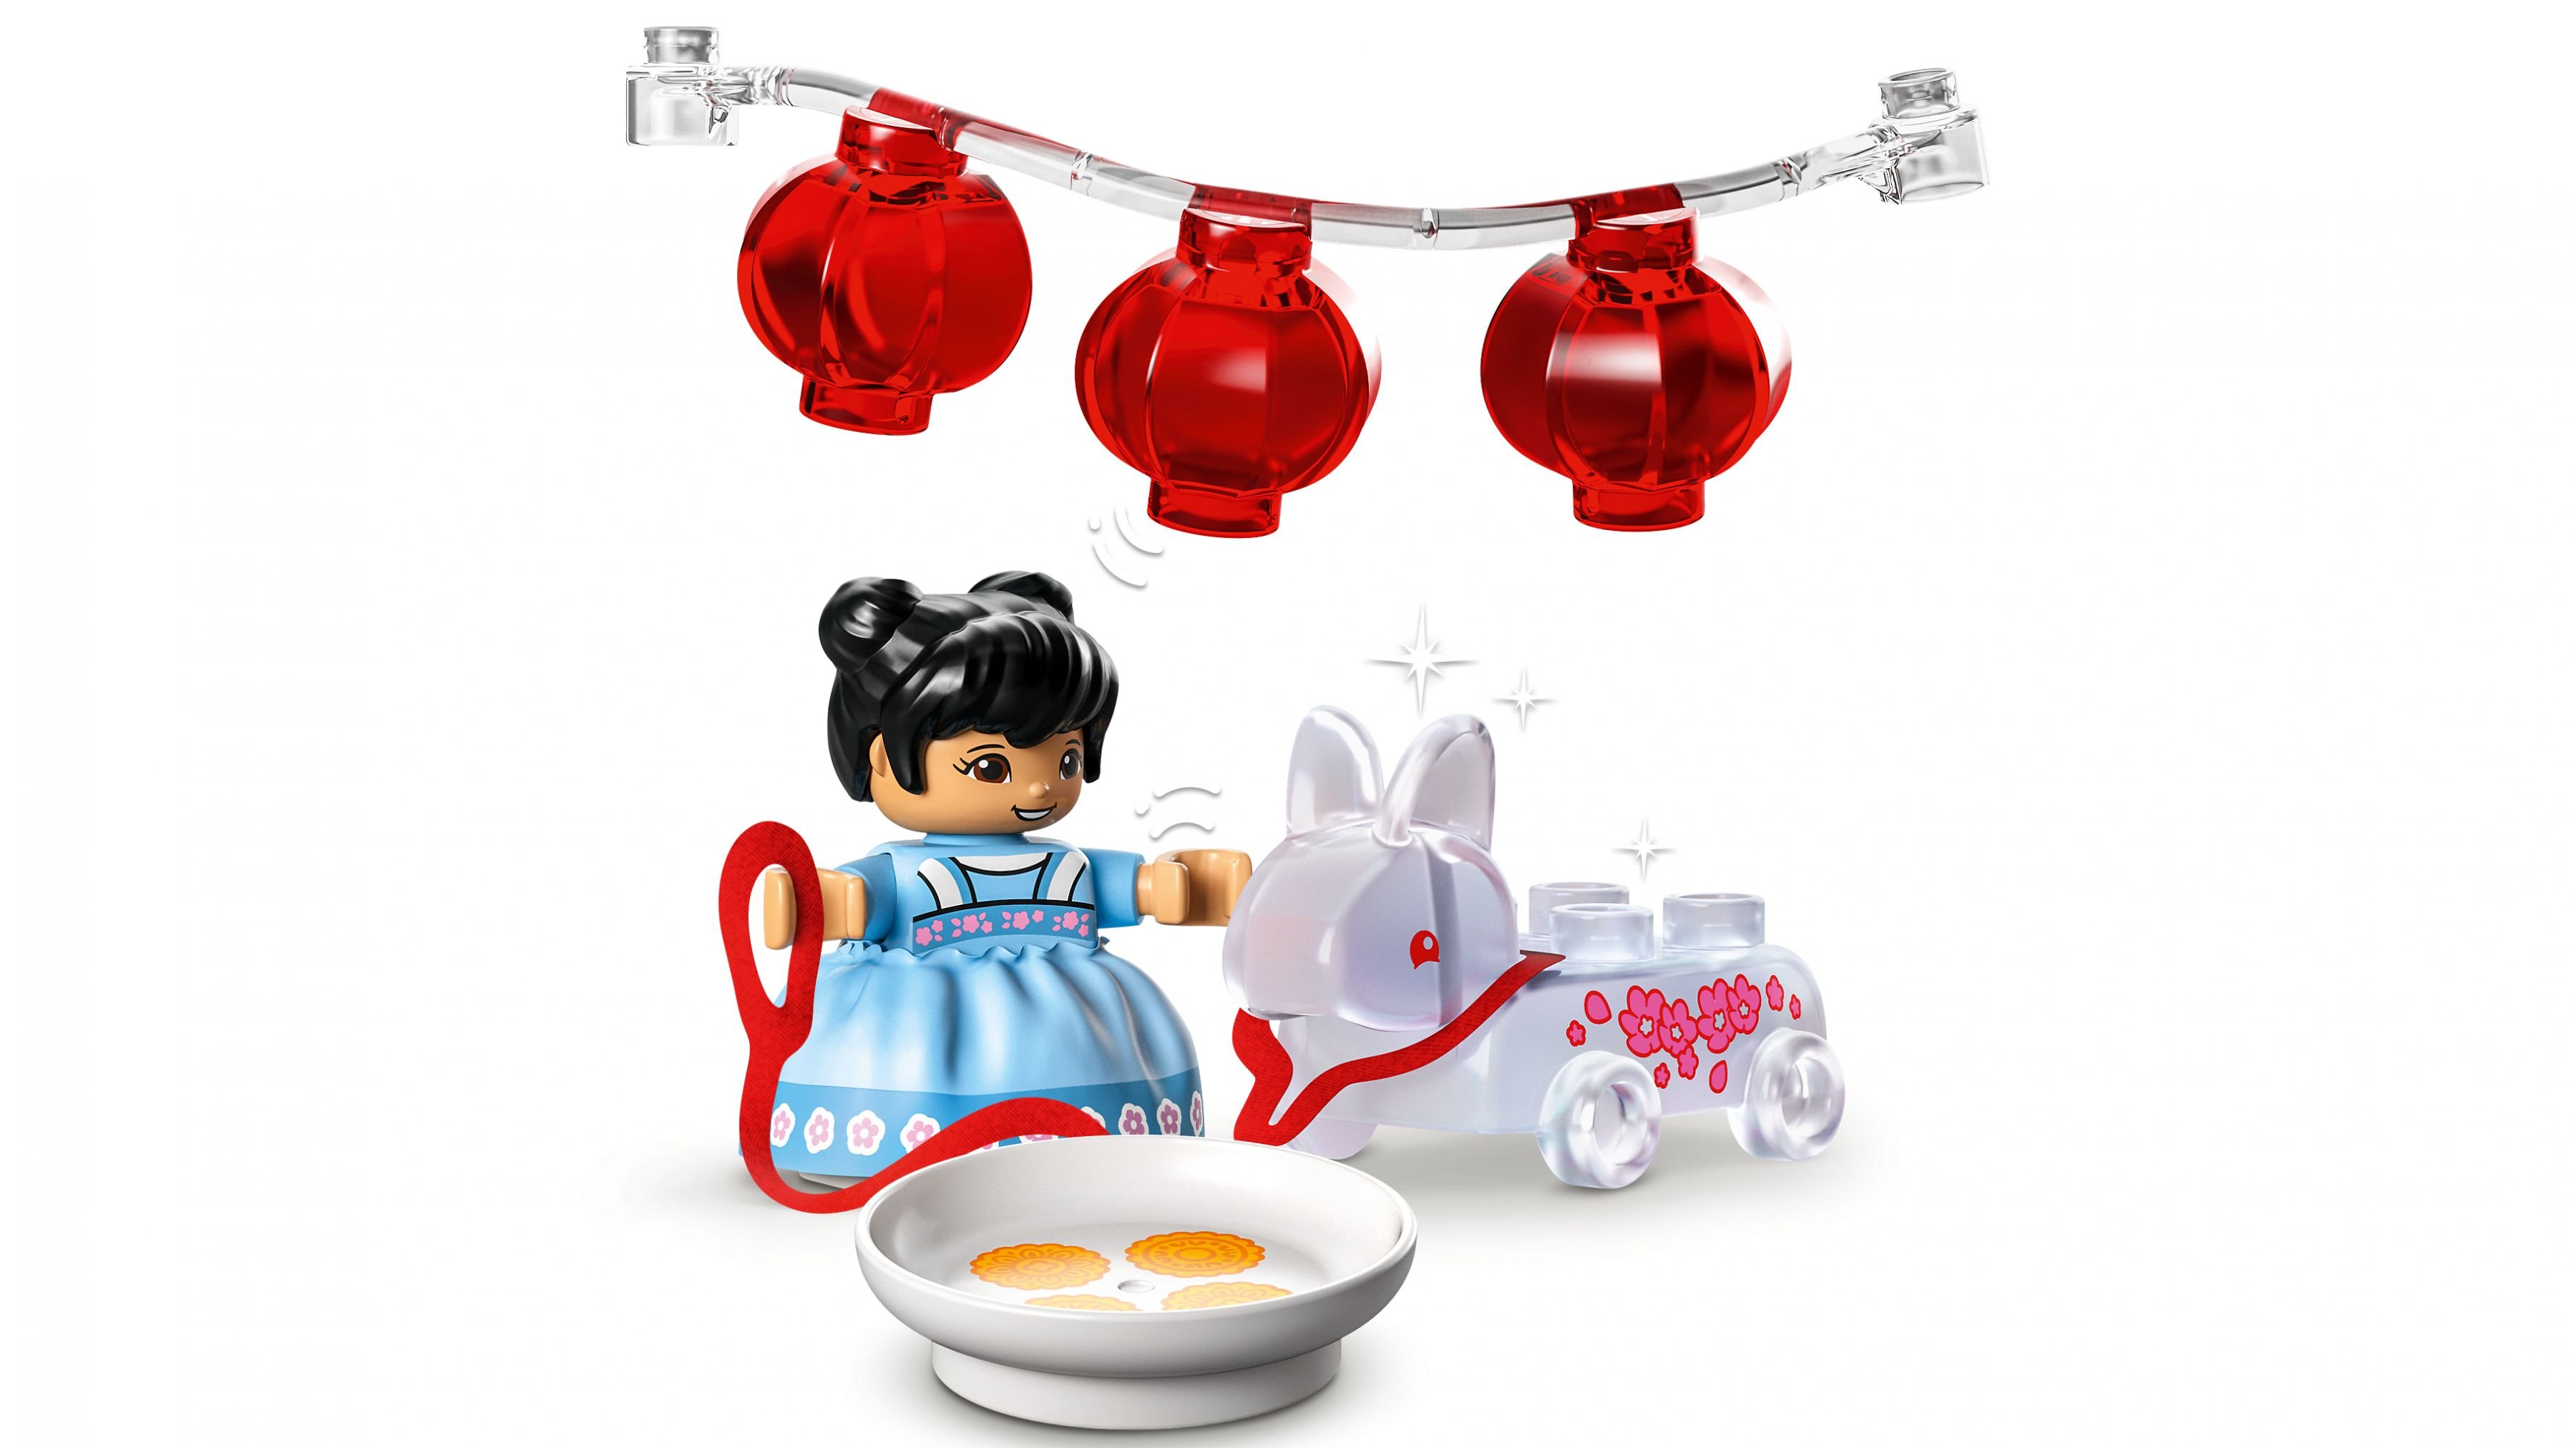 LEGO Duplo 10411 Learn about Chinese Culture LEGO_10411_WEB_SEC02_NOBG.jpg